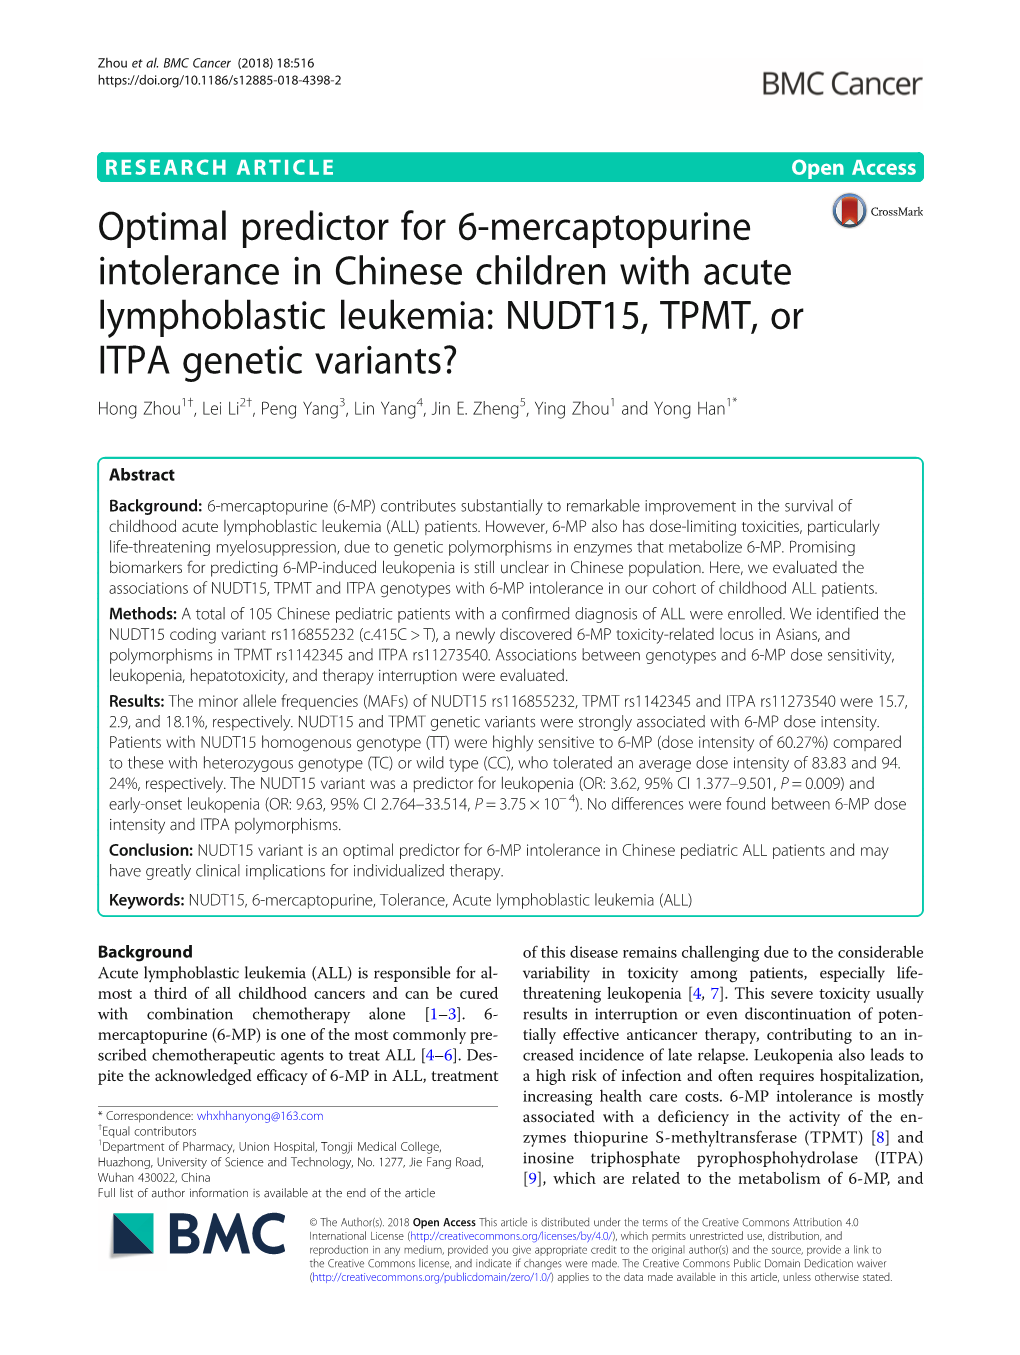 Optimal Predictor for 6-Mercaptopurine Intolerance in Chinese Children with Acute Lymphoblastic Leukemia: NUDT15, TPMT, Or ITPA